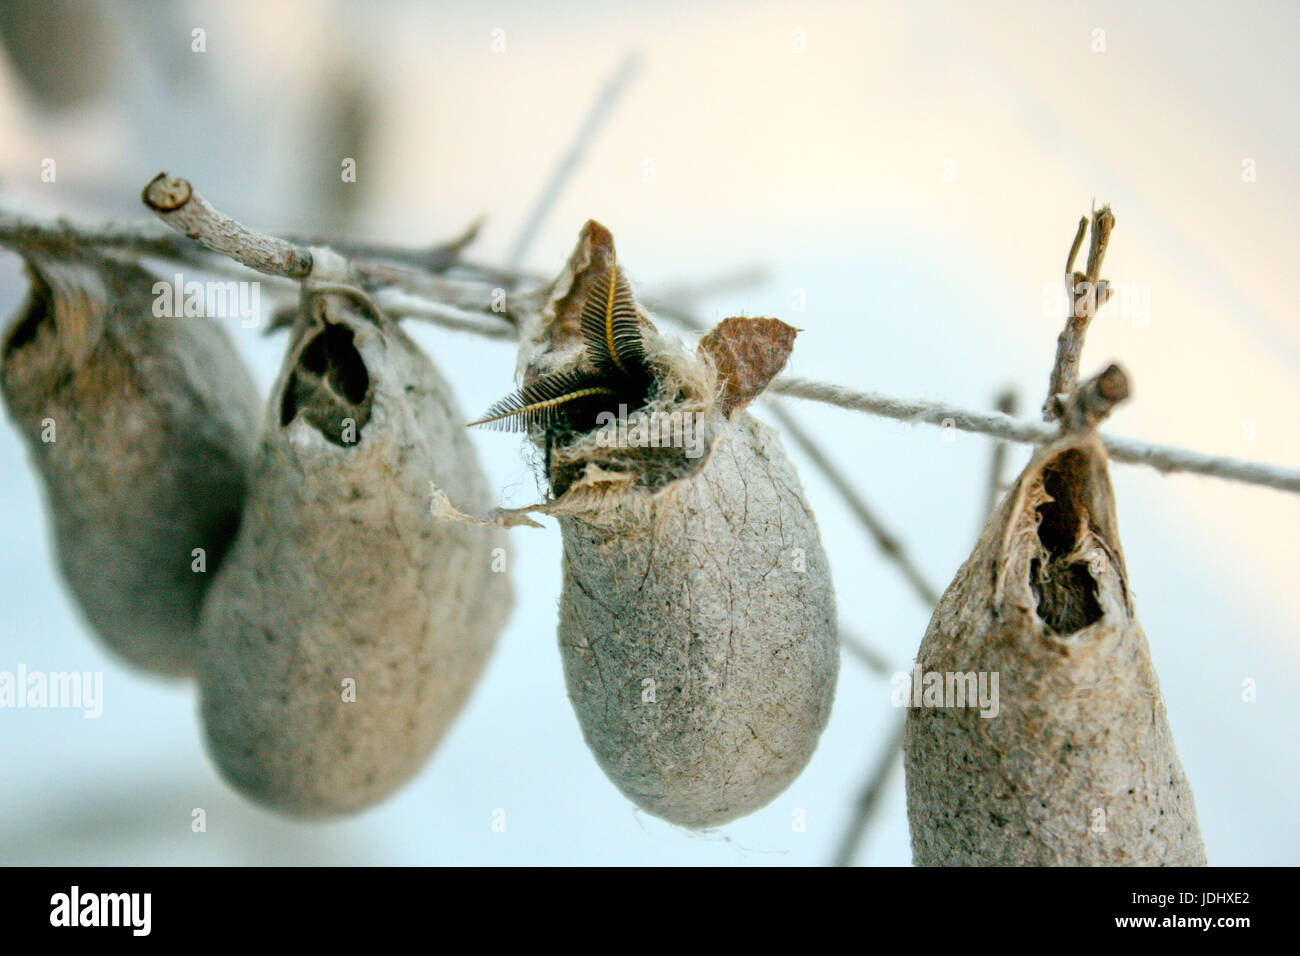 Eupackardia Calleta Moth Cocoons Hanging from a String Stock Photo